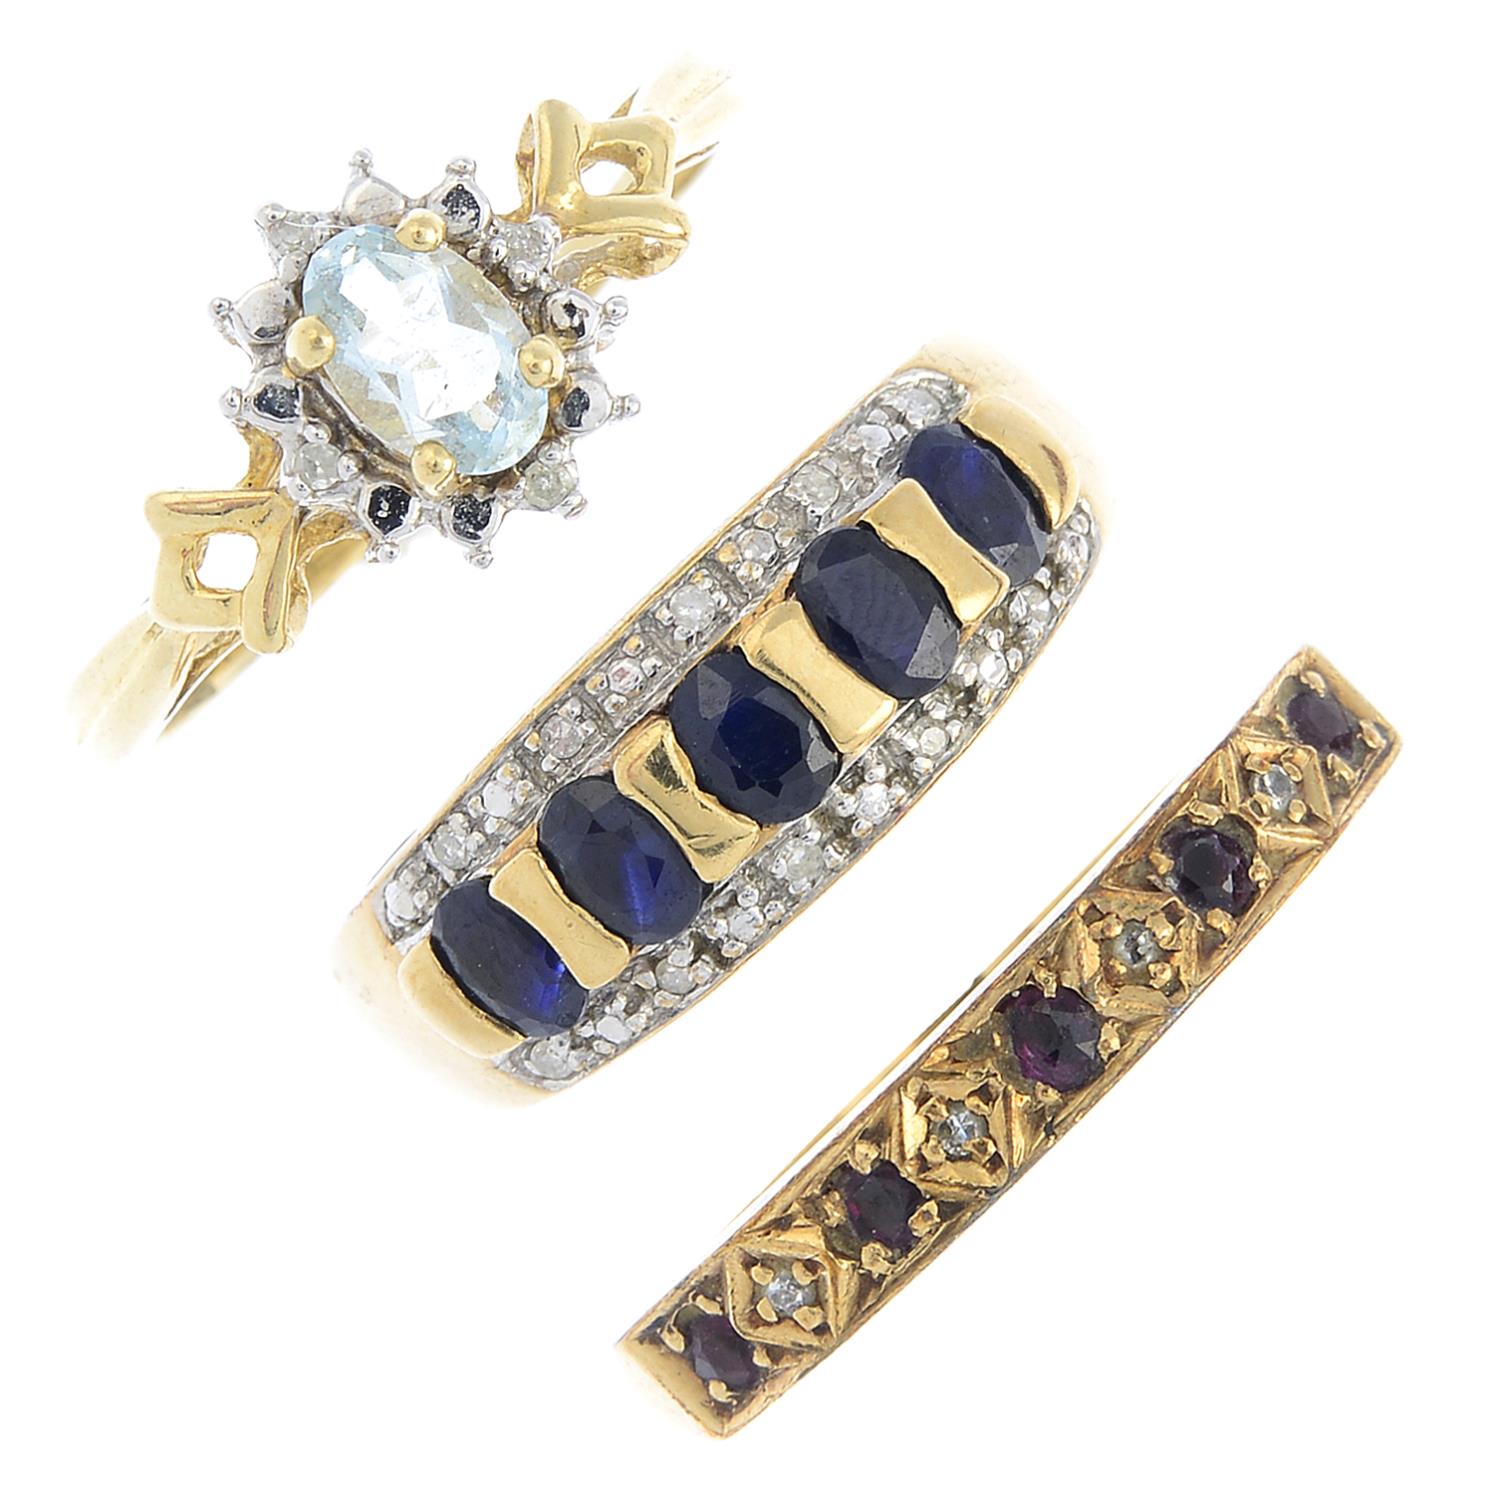 Three 9ct gold diamond and gem-set rings. To include an aquamarine and diamond cluster ring, a